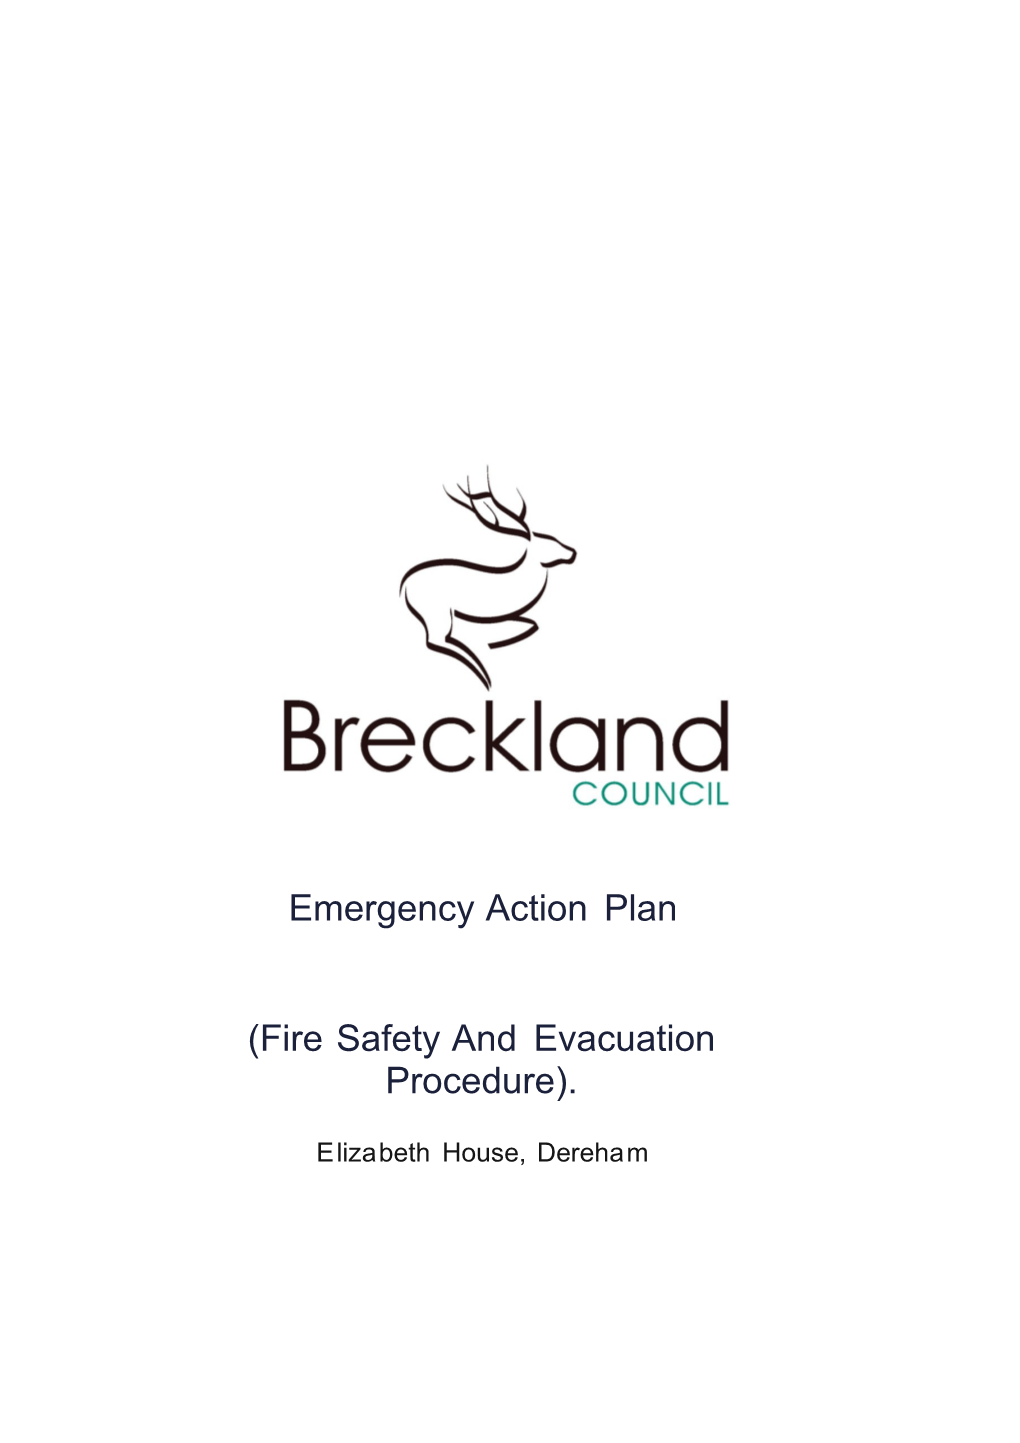 Fire Safety and Evacuation Procedure